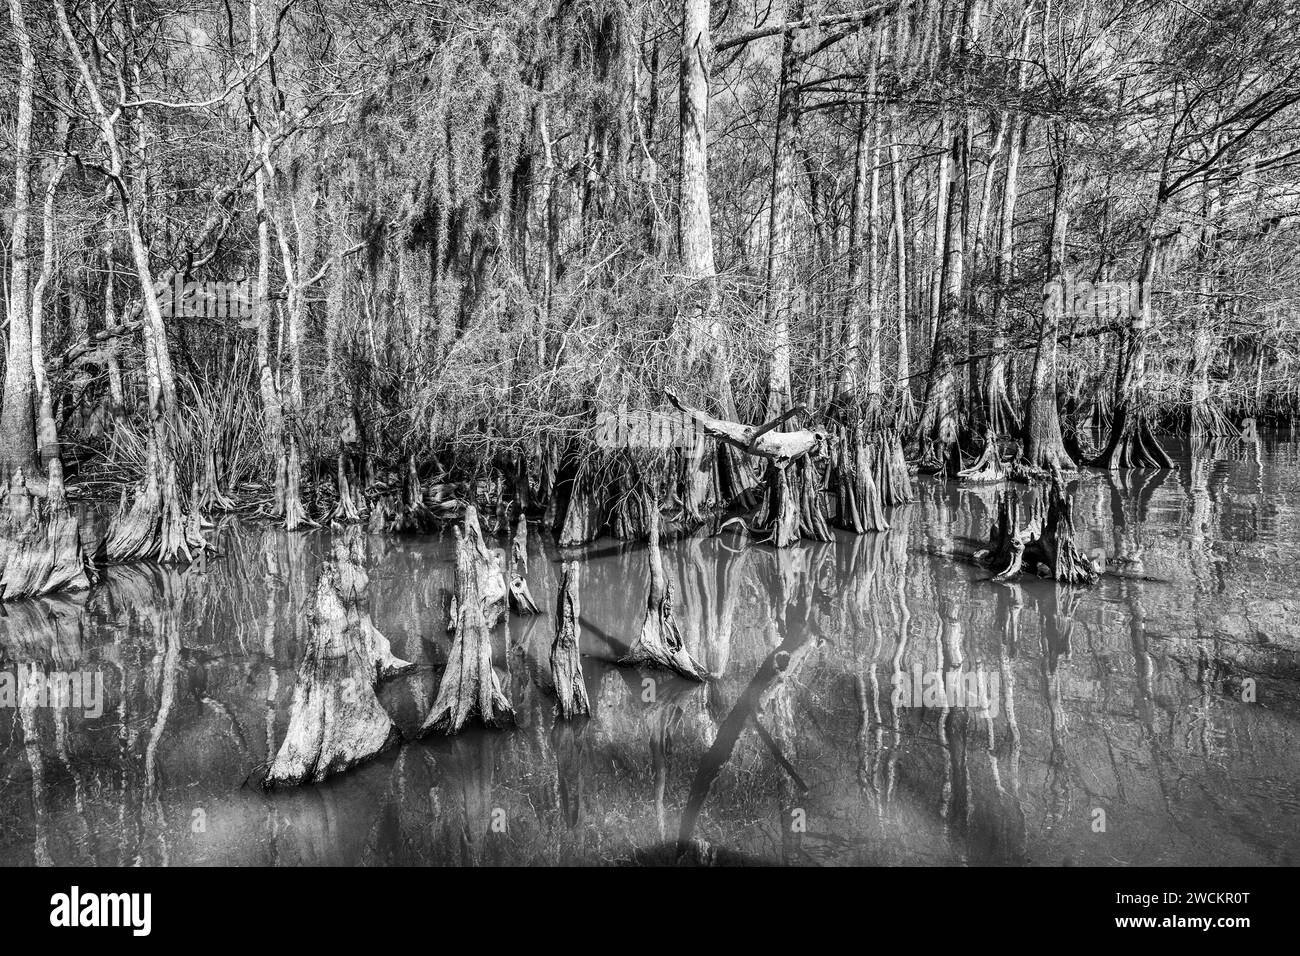 Cypress knees and bald cypress trees in Lake Dauterive in the Atchafalaya Basin or Swamp in Louisiana. Stock Photo